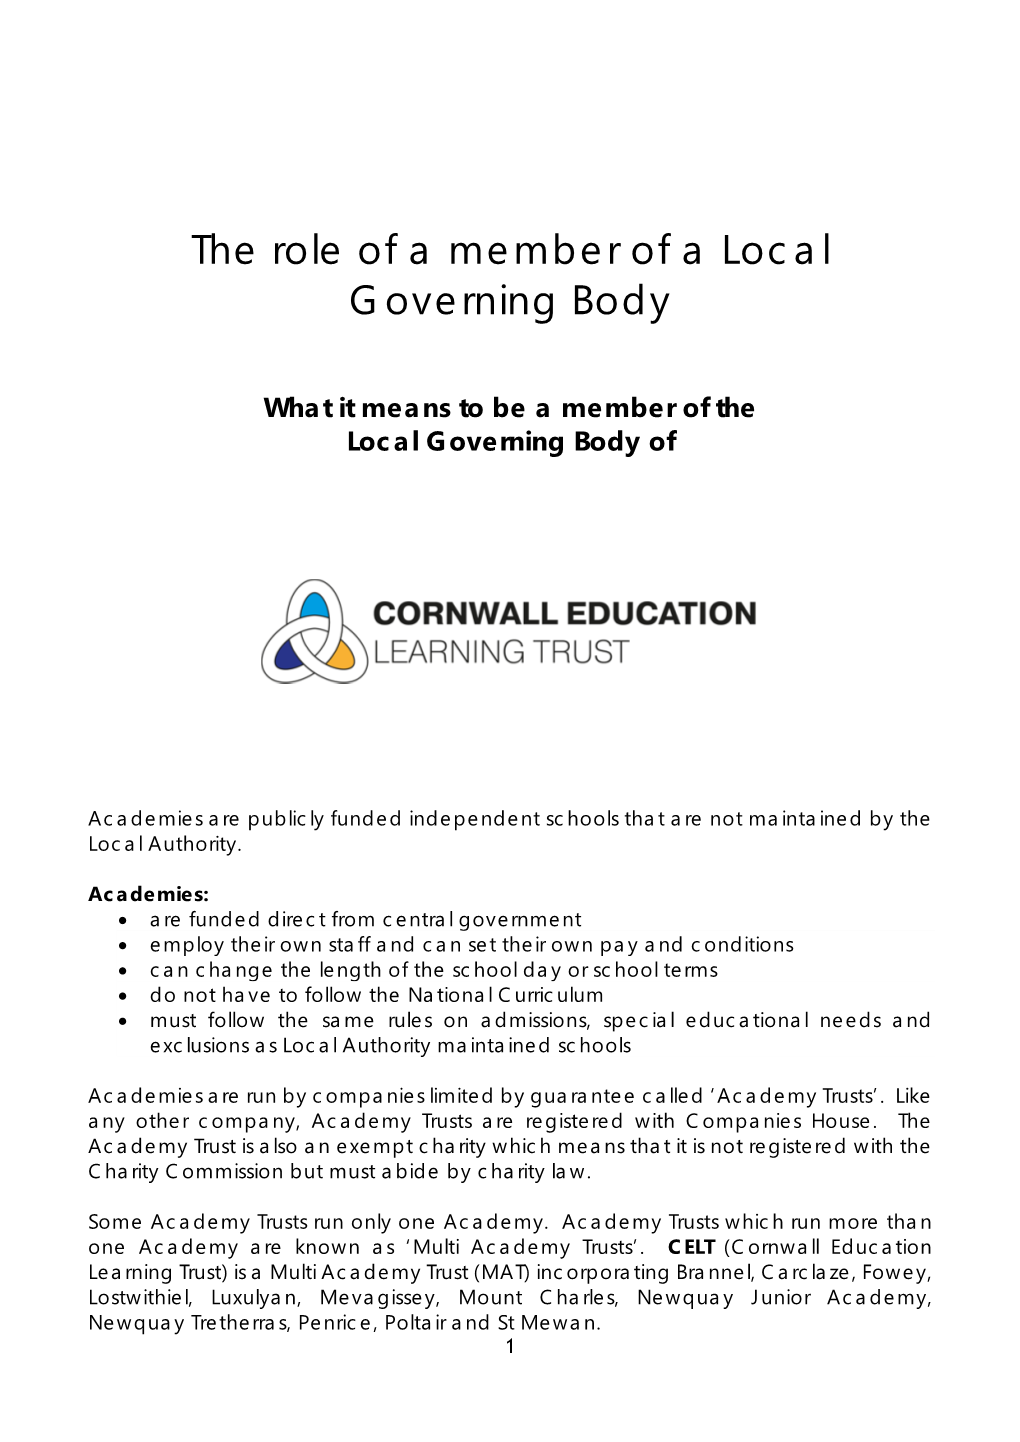 The Role of a Member of a Local Governing Body